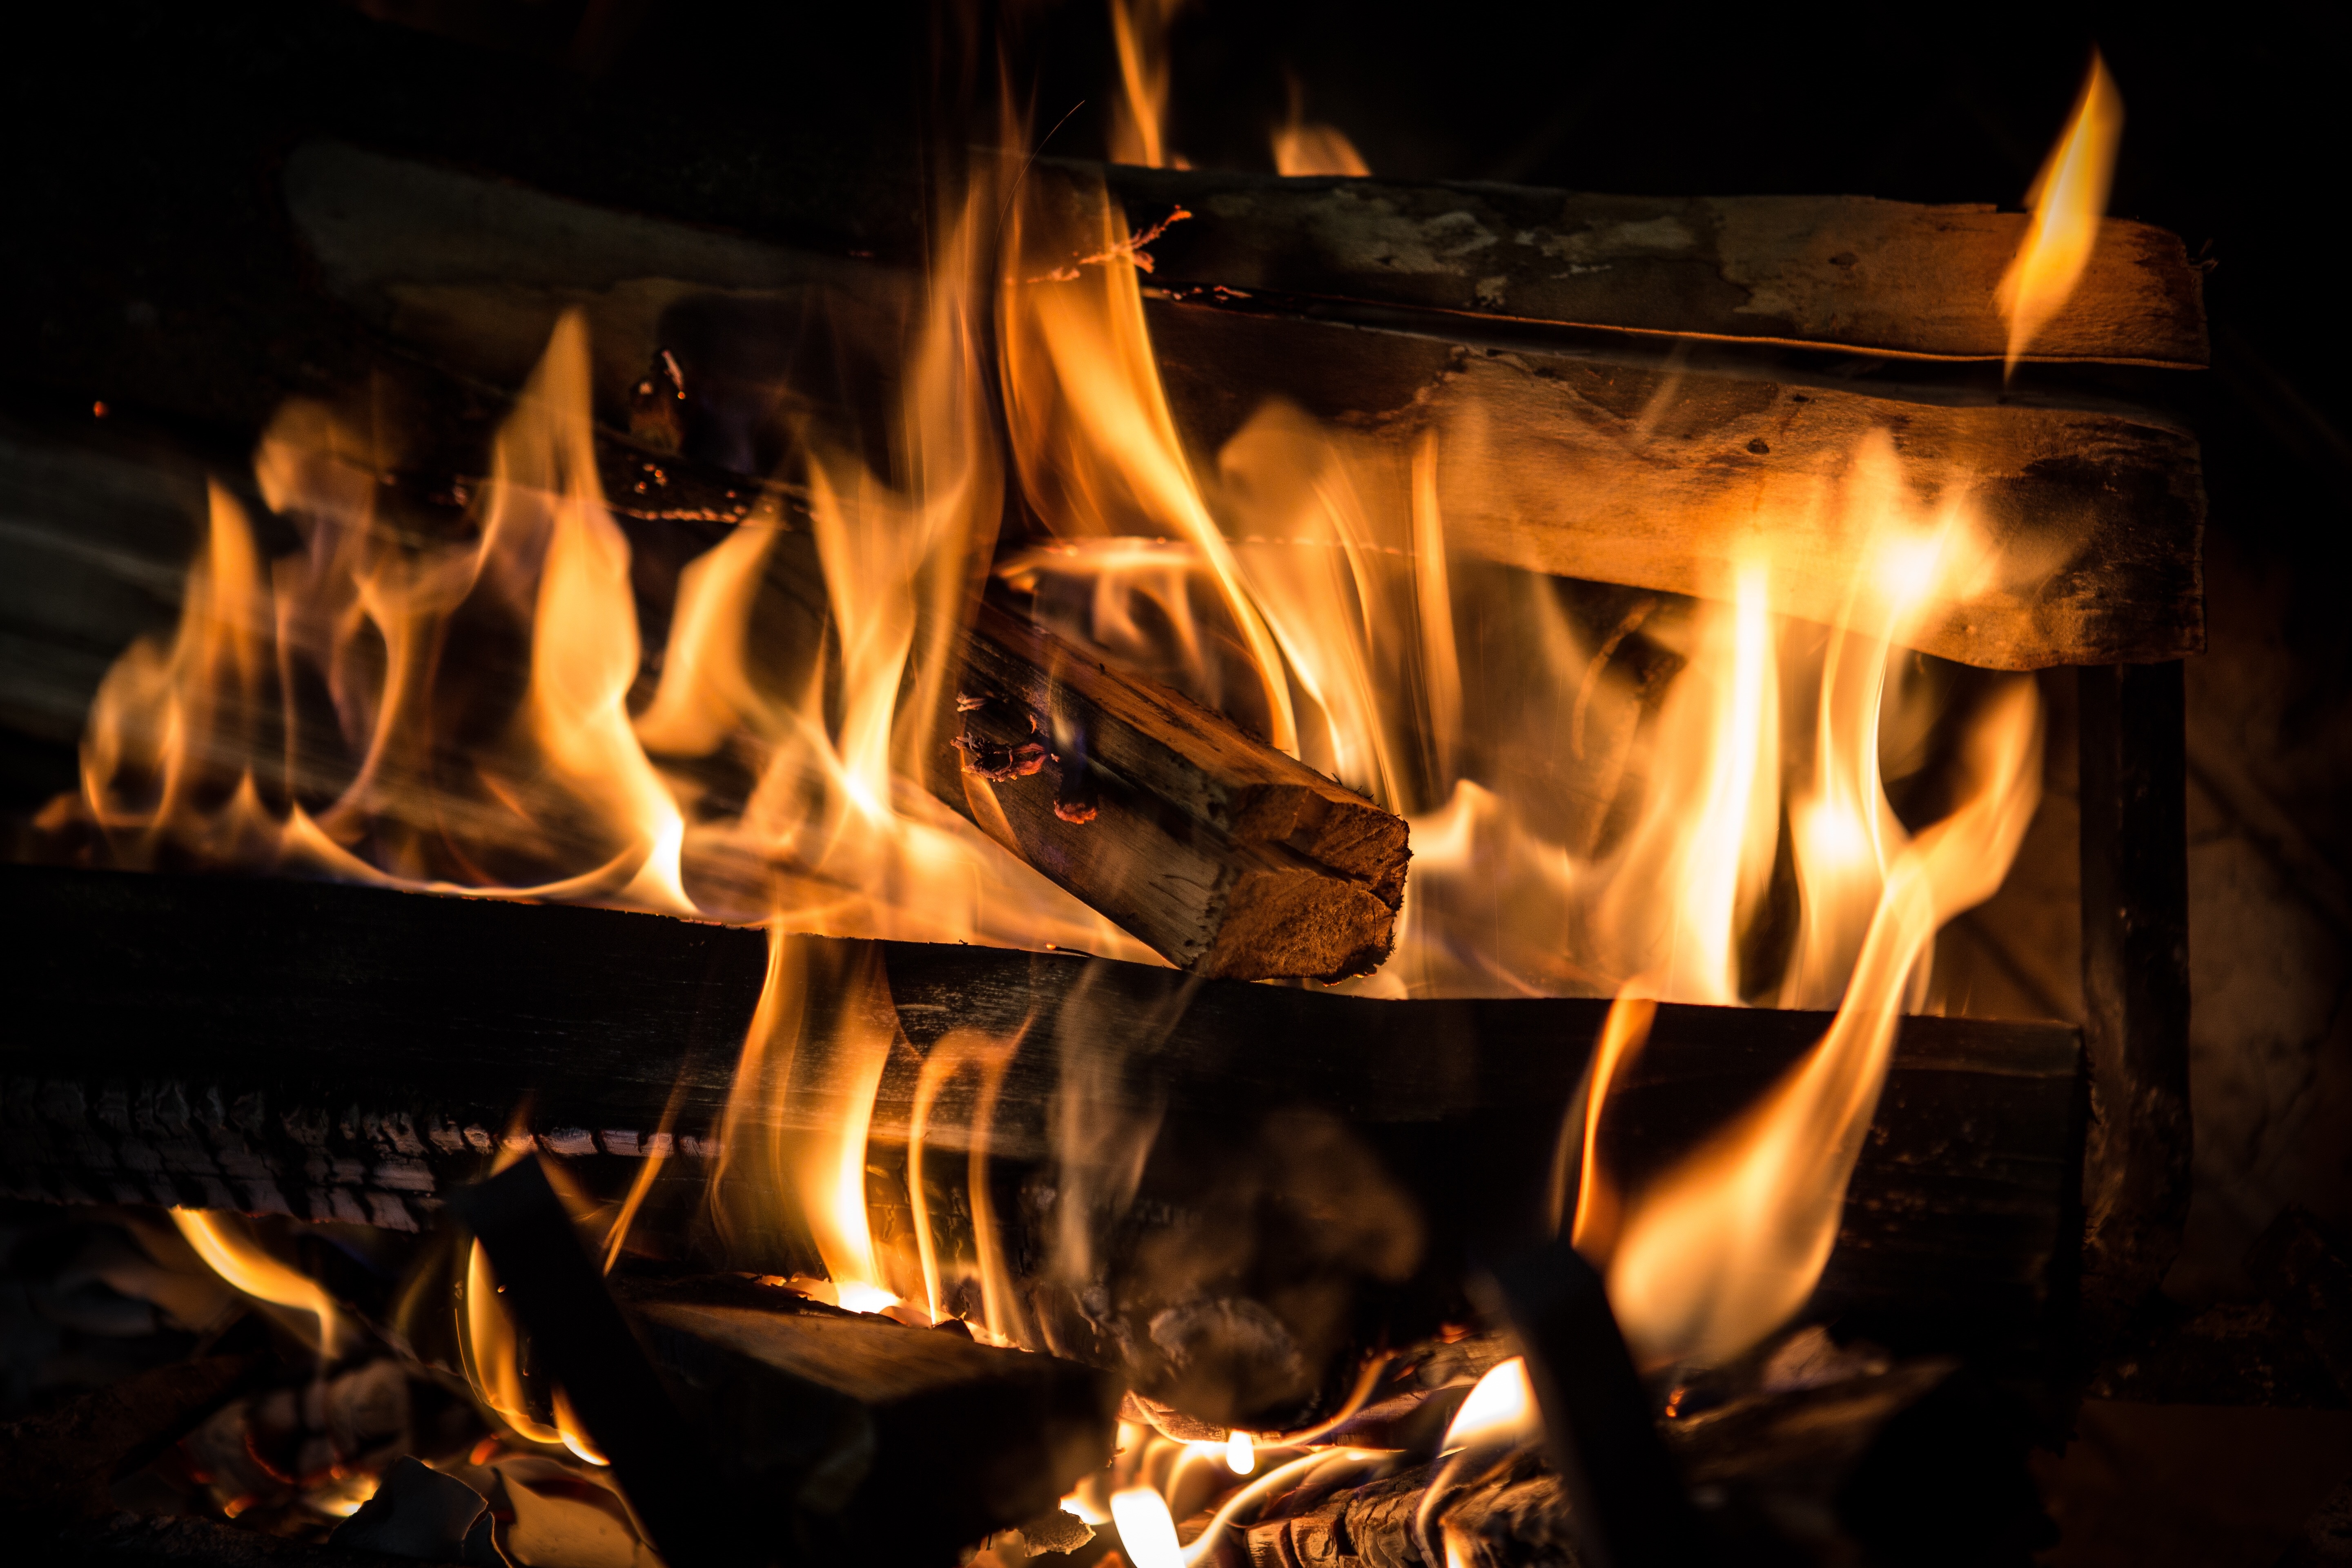 124043 download wallpaper fire, coals, flame, miscellanea, miscellaneous, firewood, fireplace screensavers and pictures for free